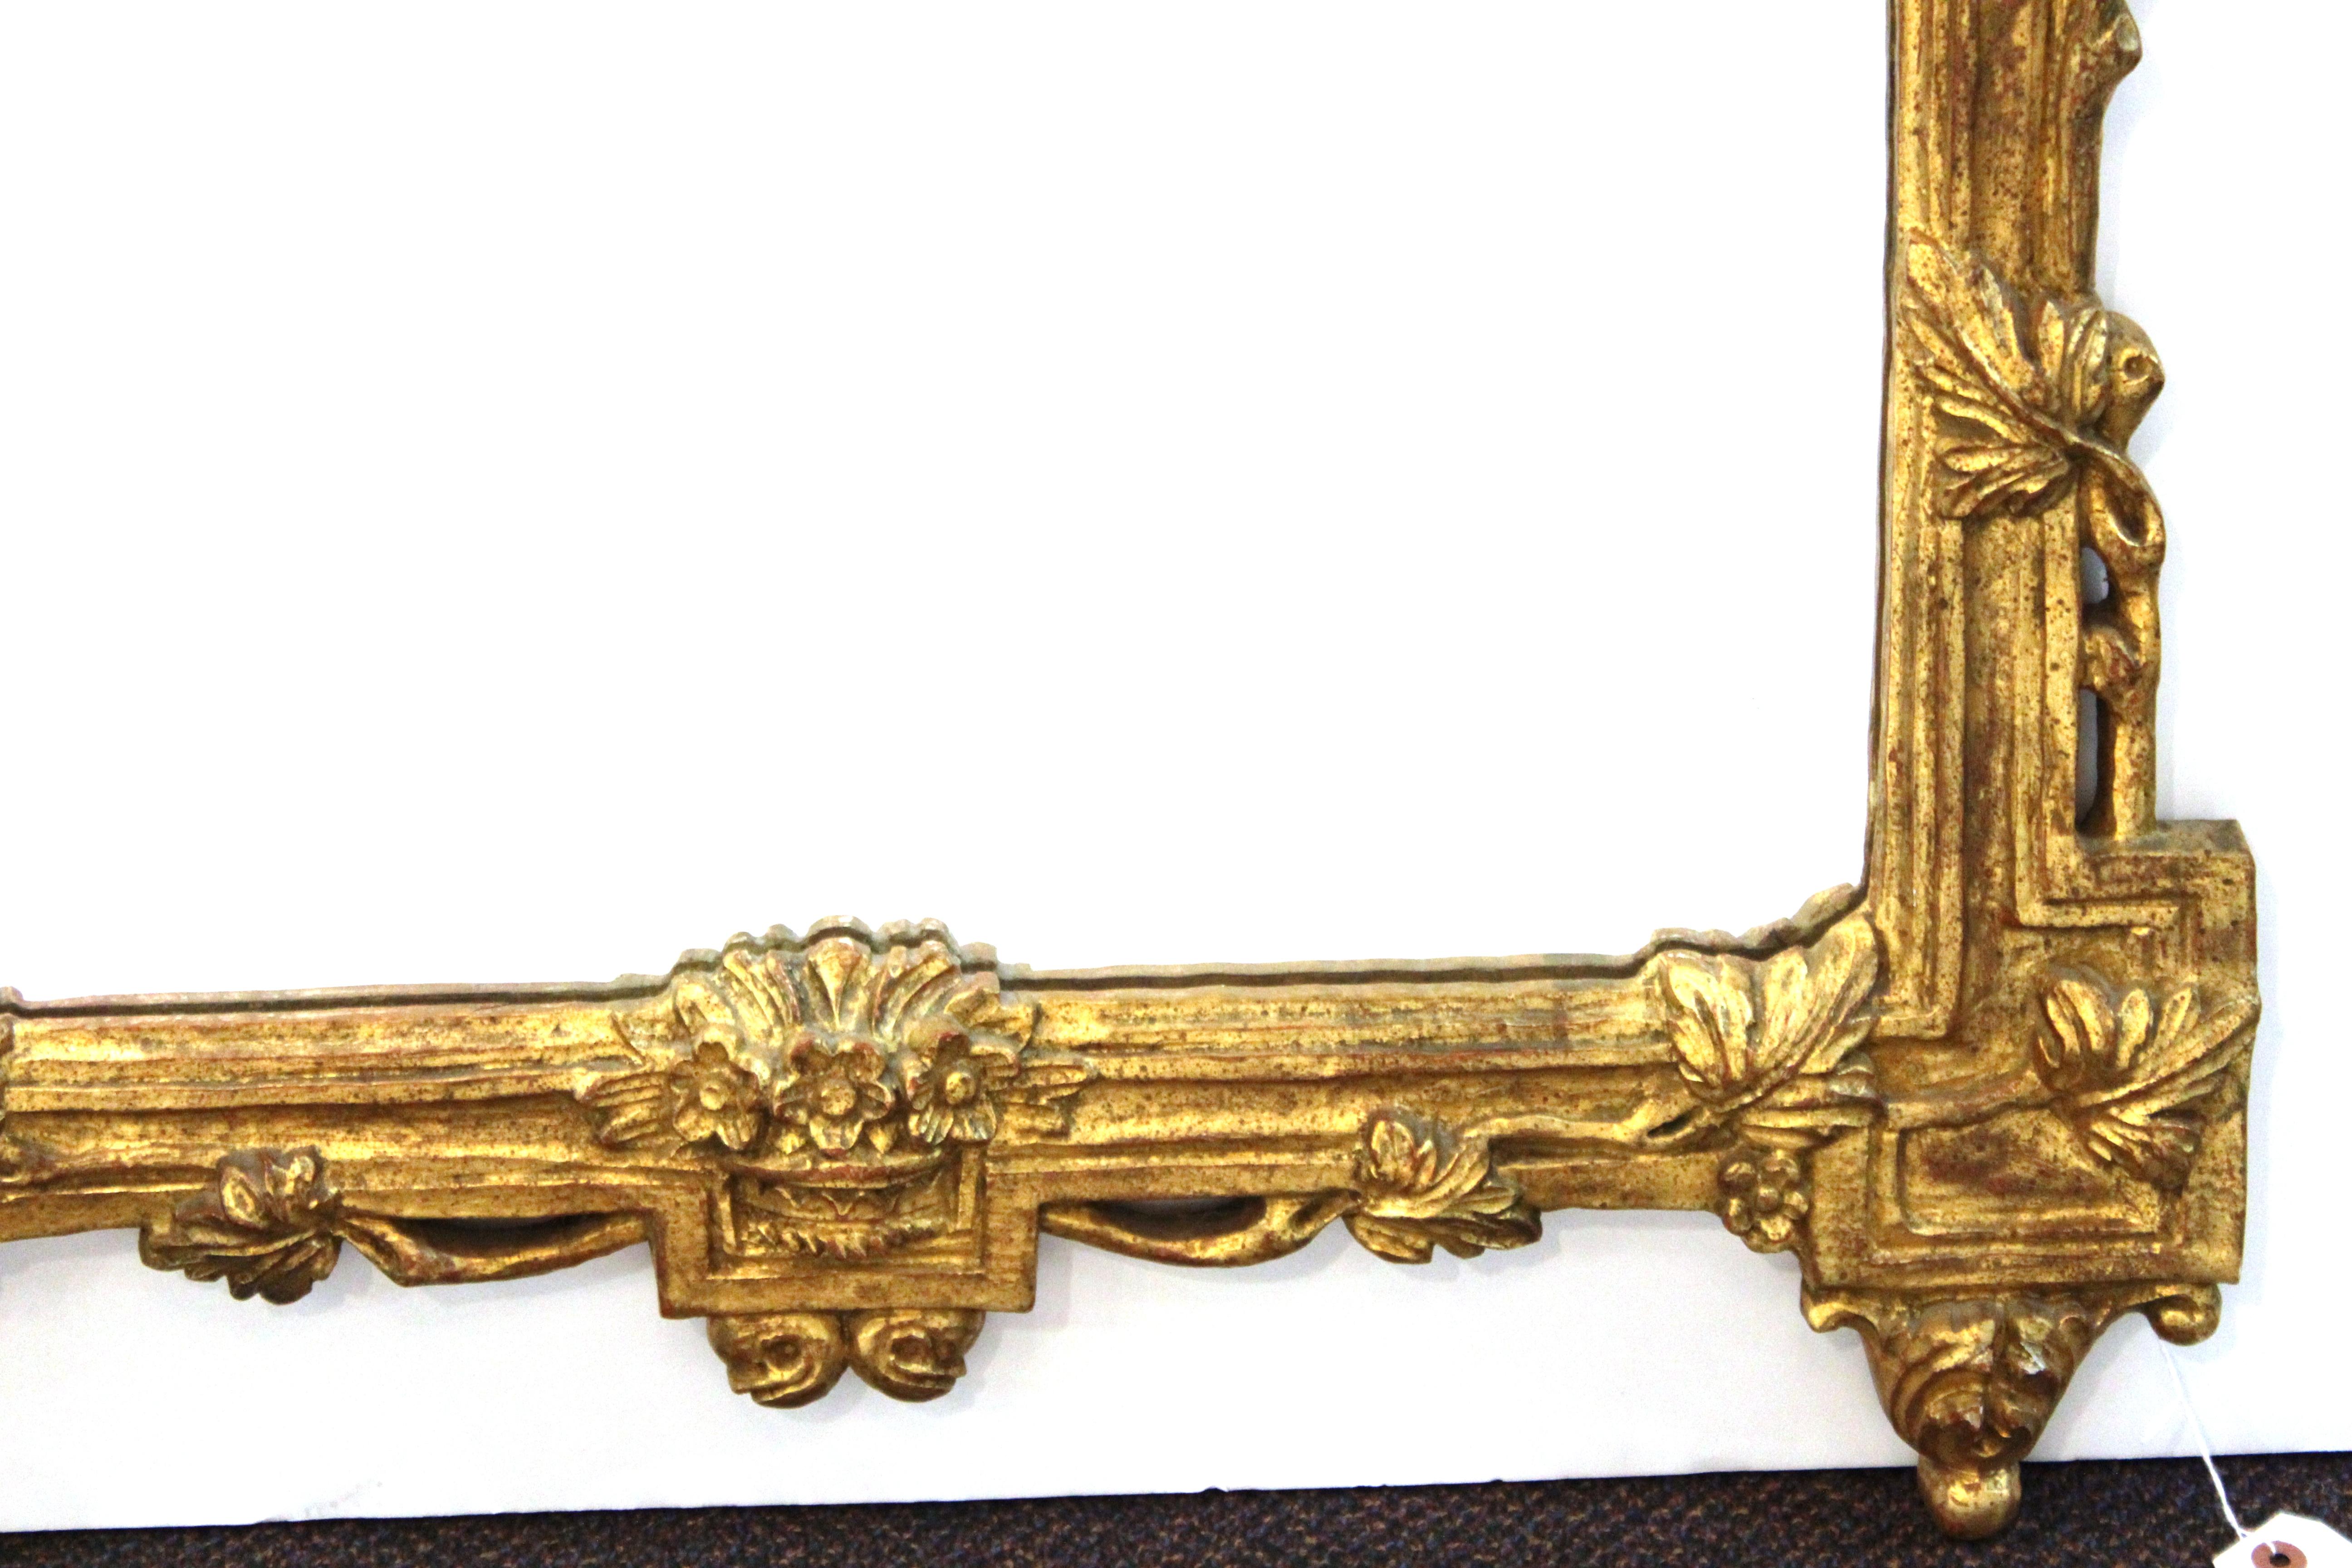 20th Century Italian Hollywood Regency Mirror With Neoclassical Revival Gilt Frame